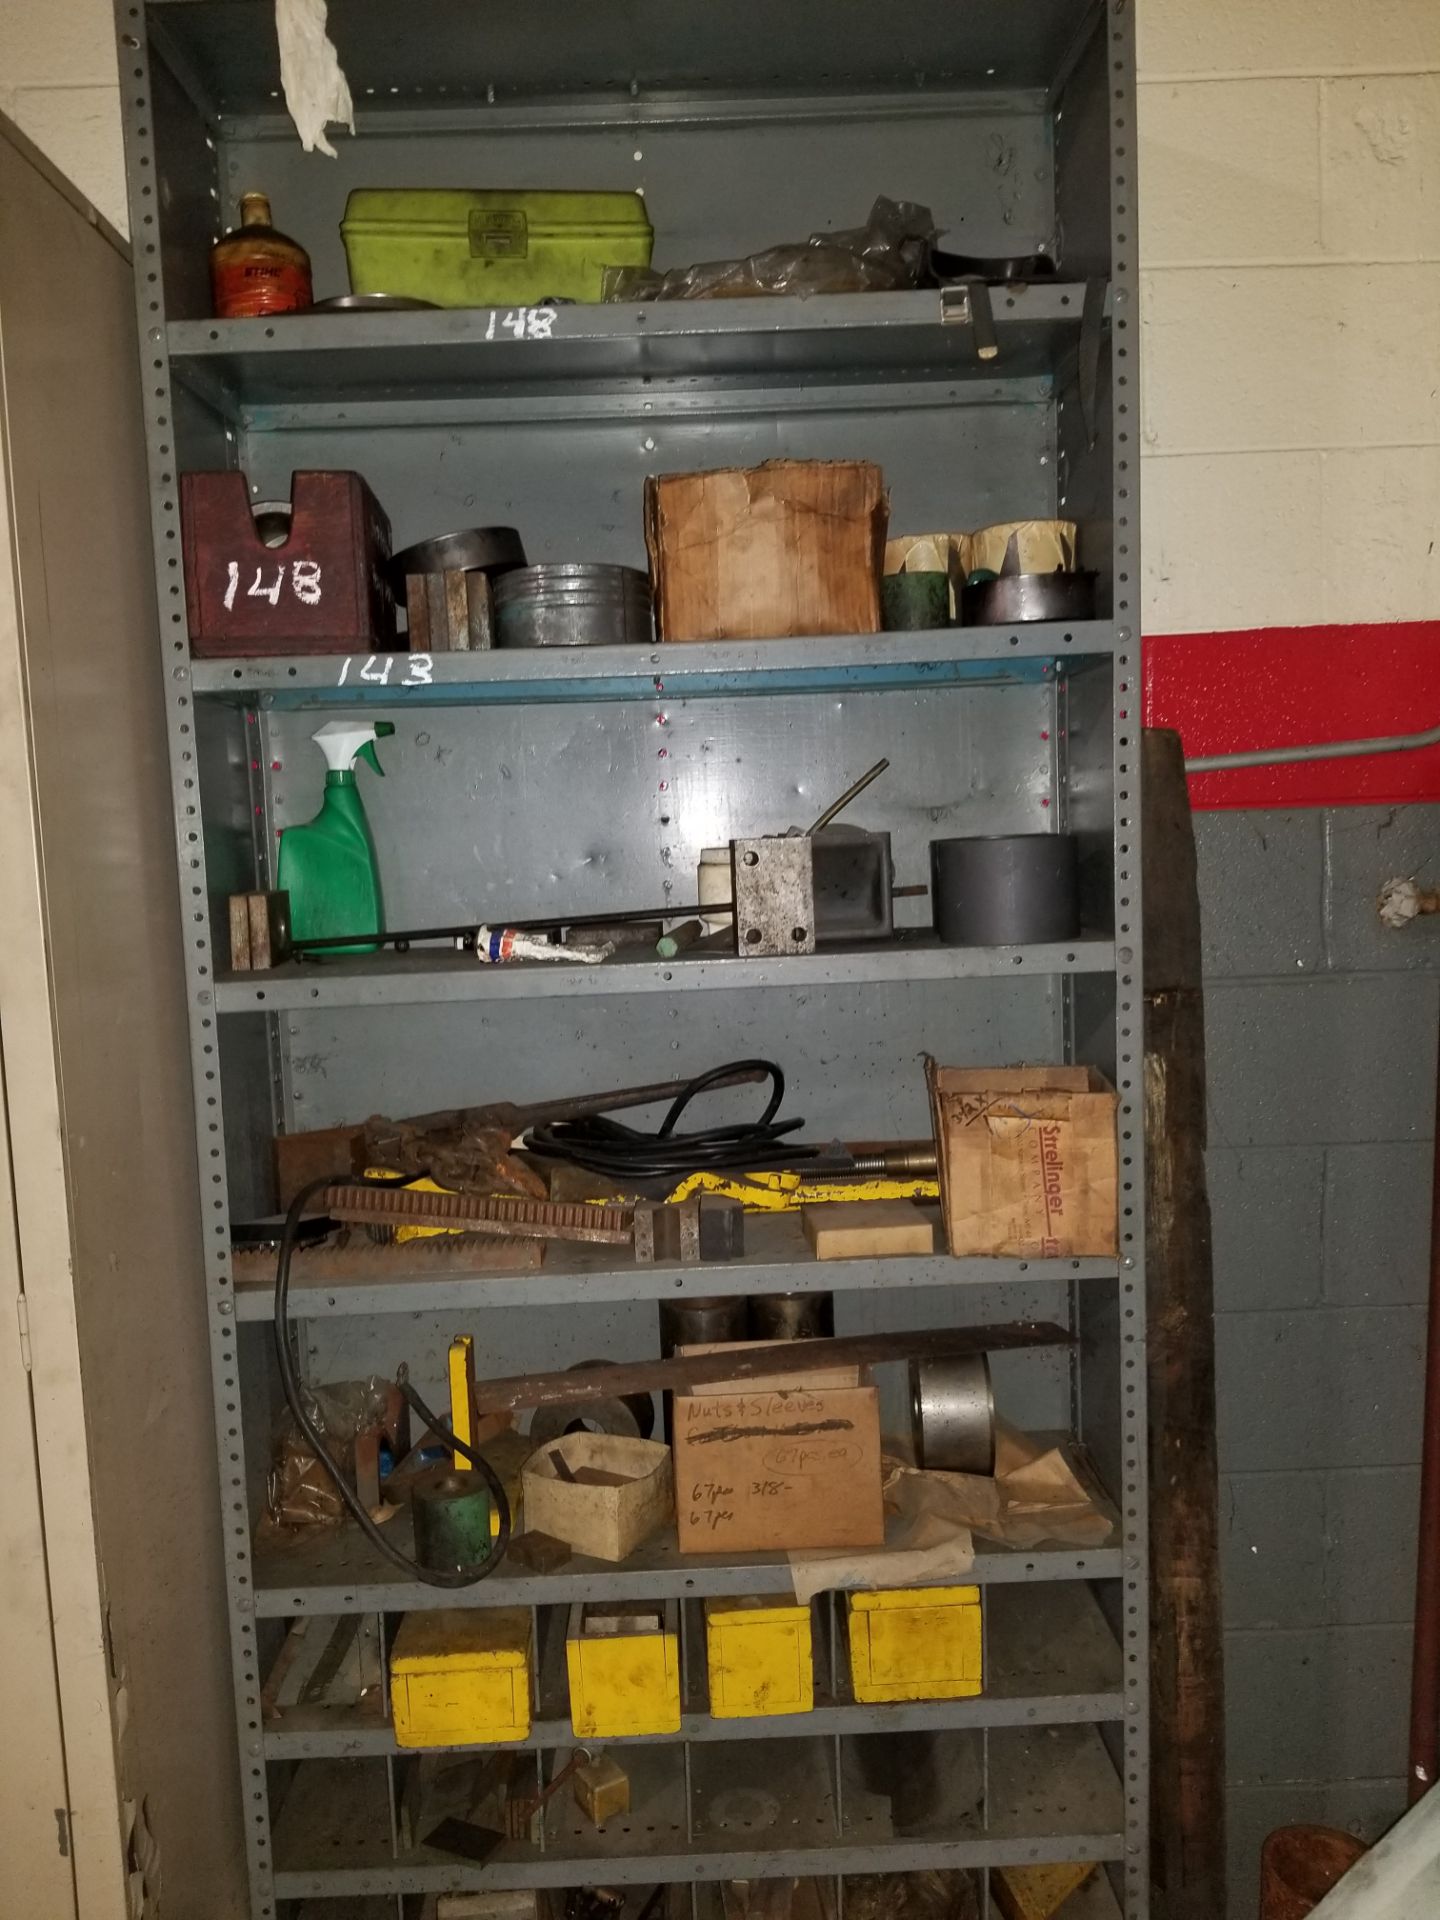 Pair of Upright Storage Cabinets, Refrigerator, Shelving Unit with Misc. Parts - Image 2 of 5